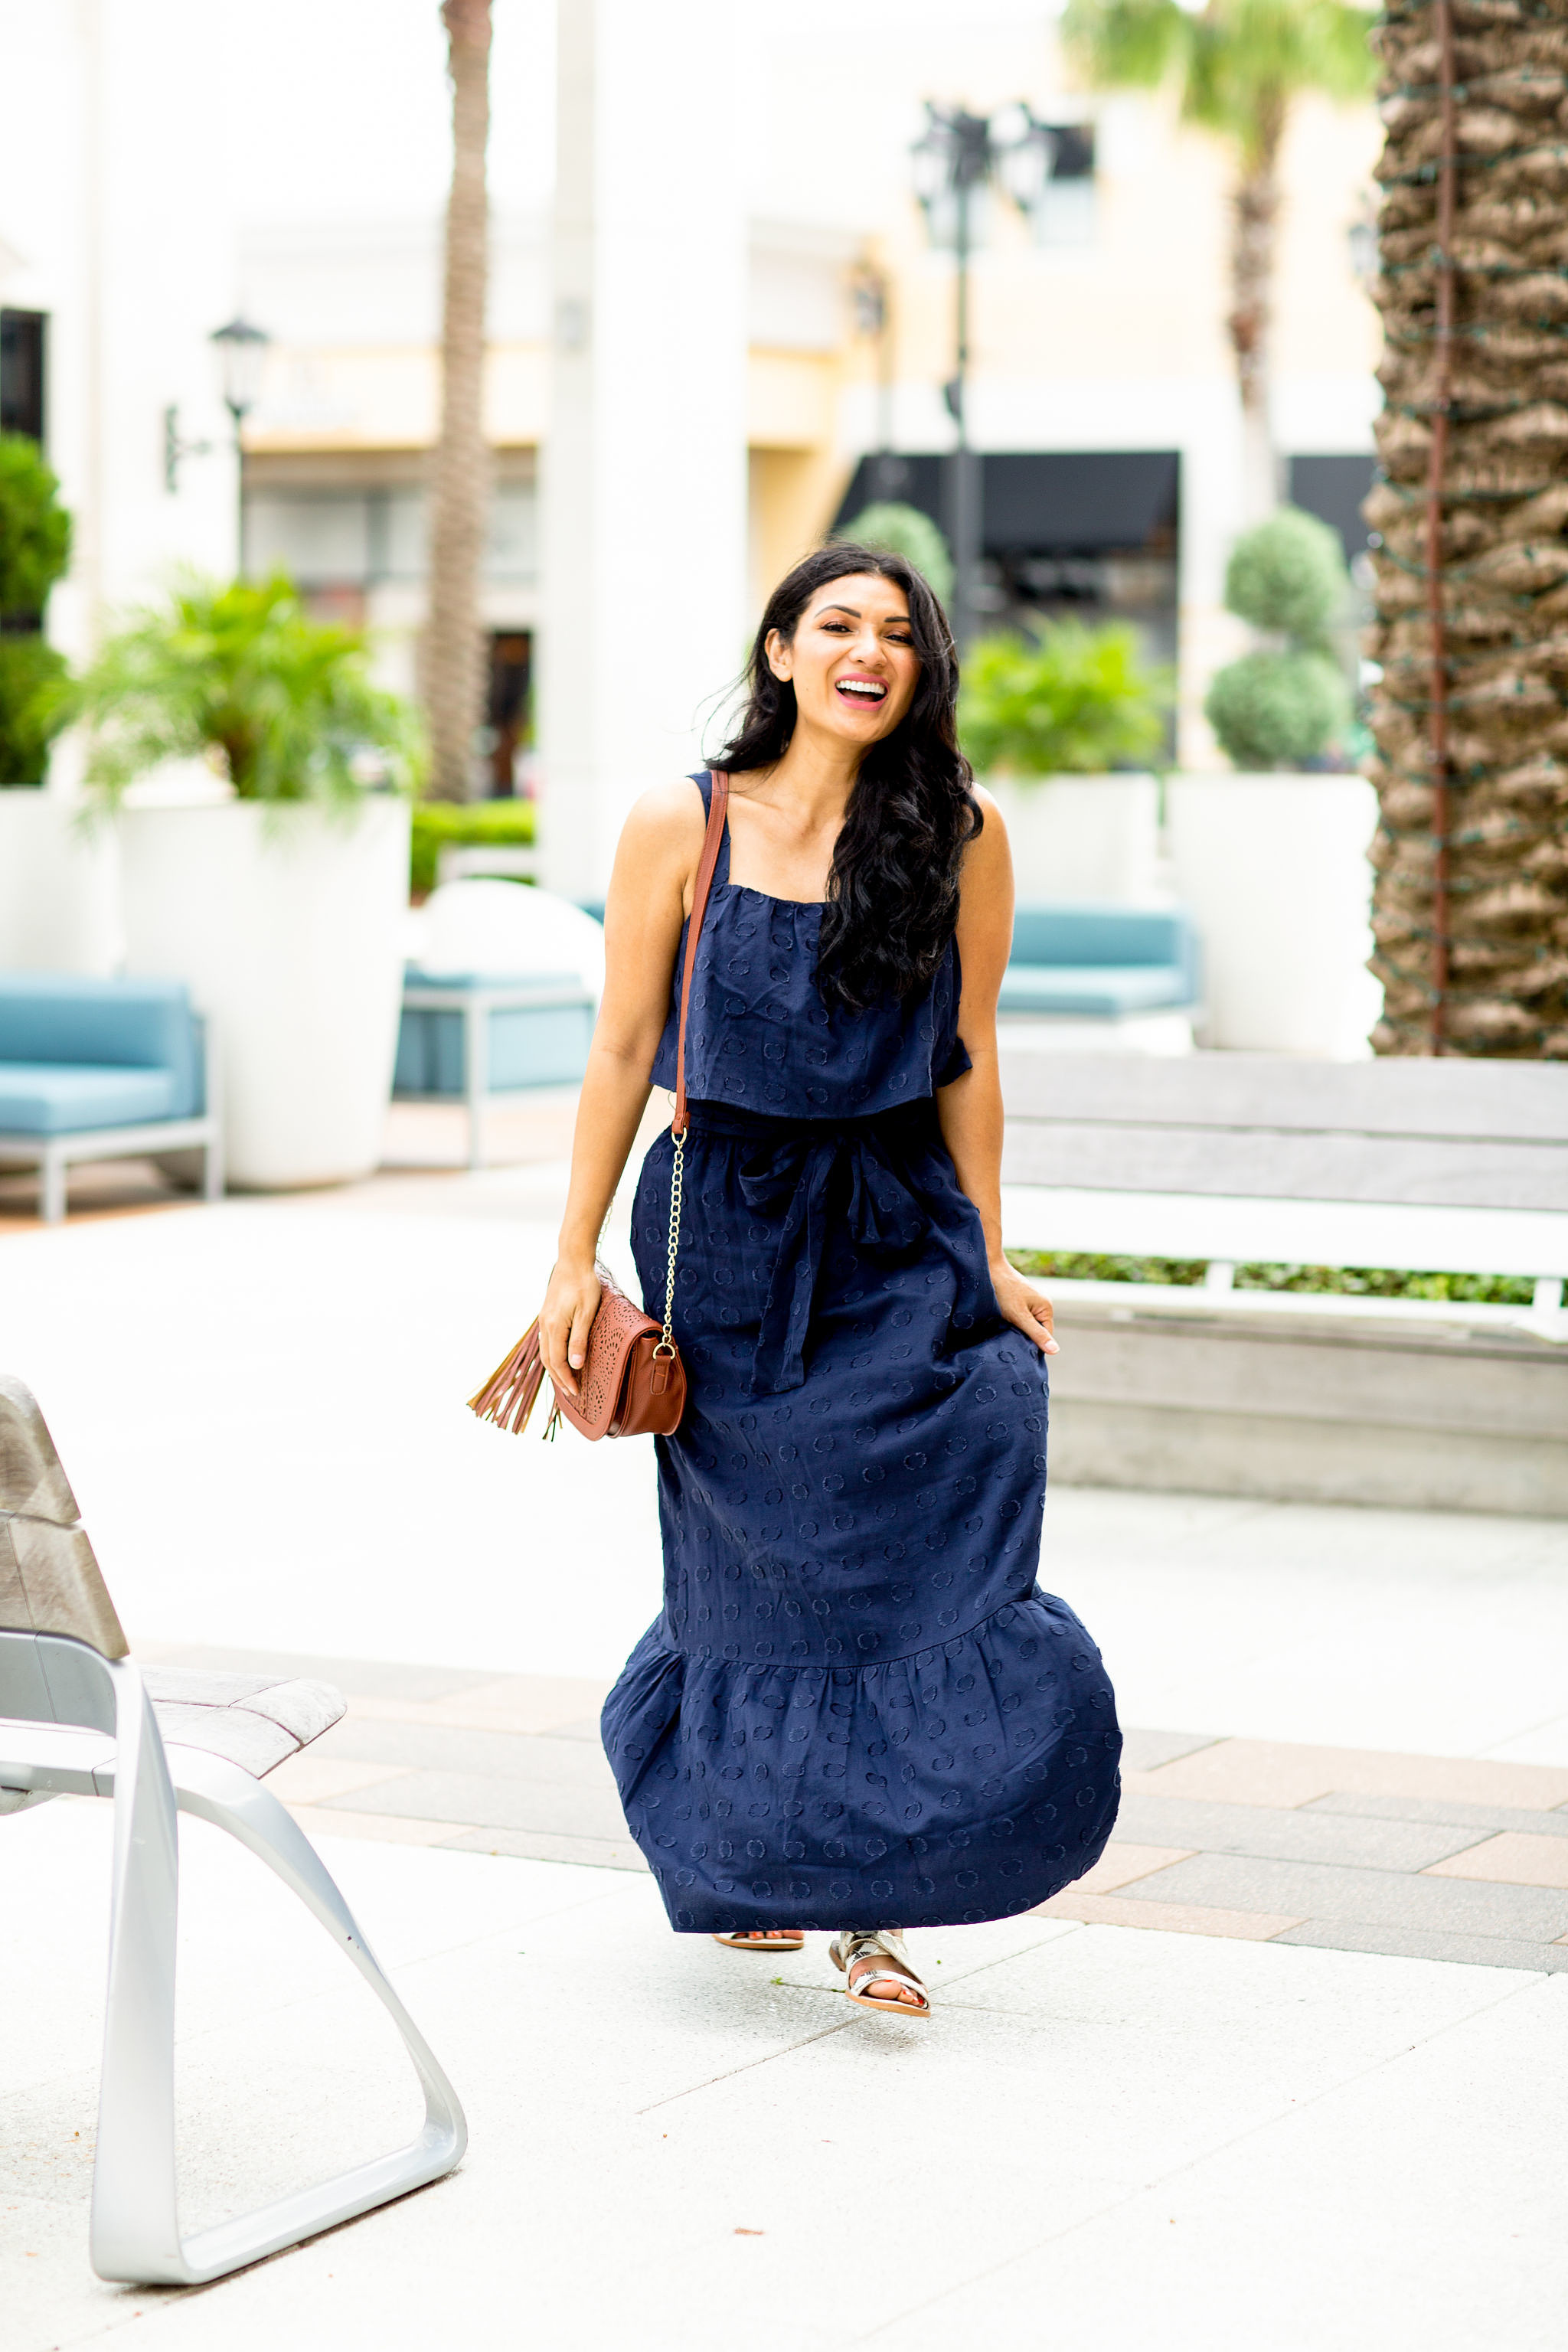 Looking for the perfect summer dress? Orange County Blogger Debbie Savage is sharing the perfect summer dress from 1901 by Nordstrom. Click to see it here!